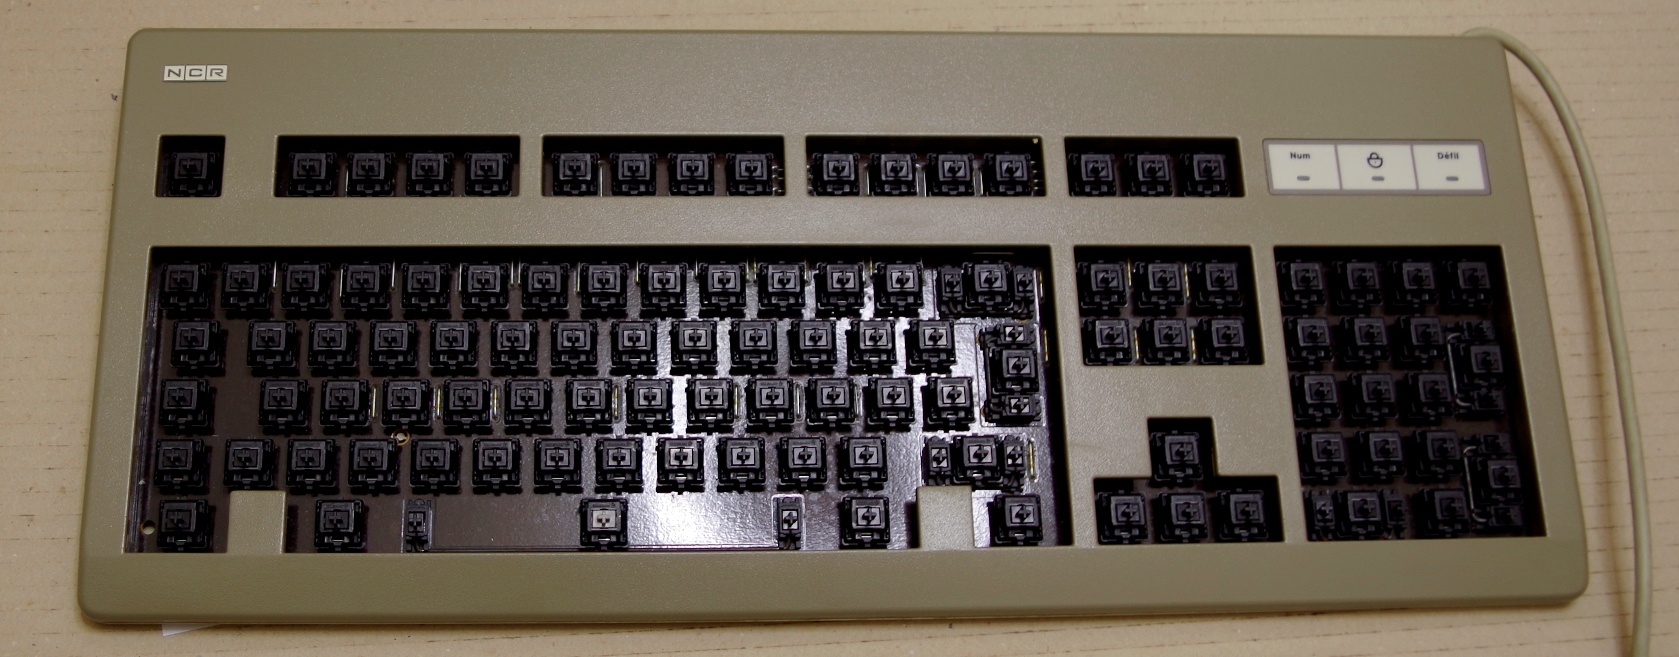 G81-3077 with MX assembly.JPG